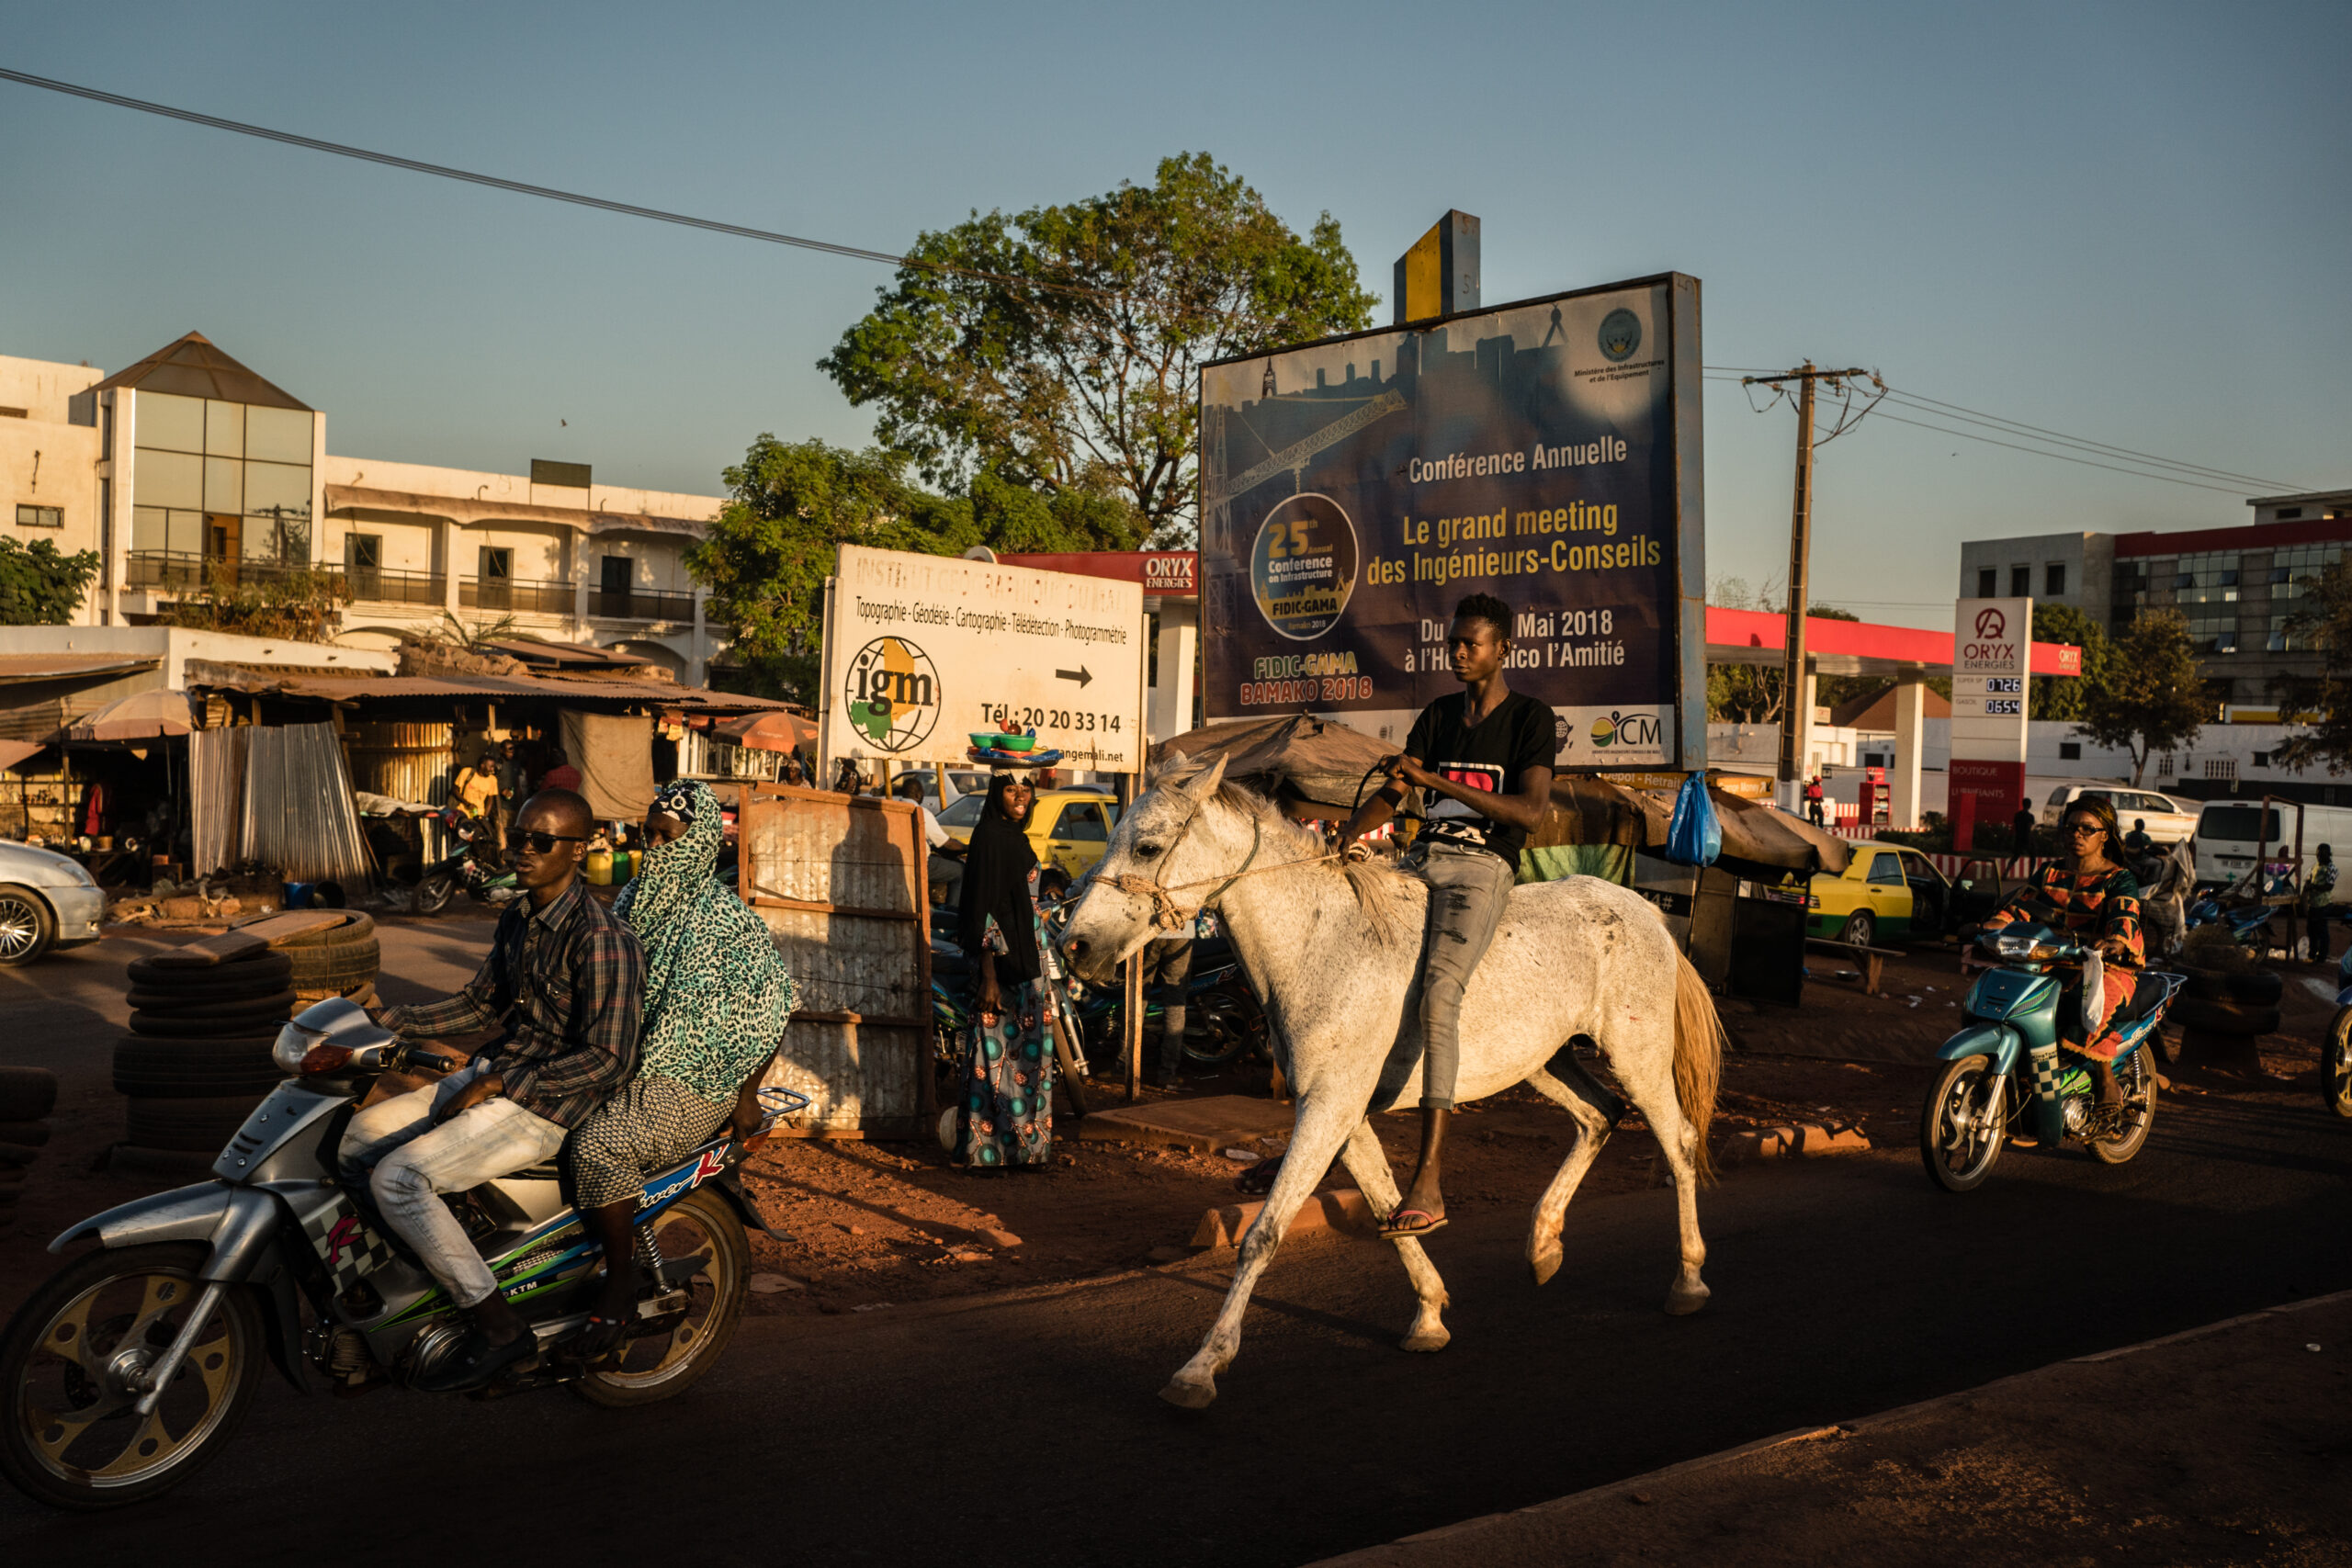 Busy street in Mali. Cars, motor-taxis, a person on a horse and pedestrians are going about their day.